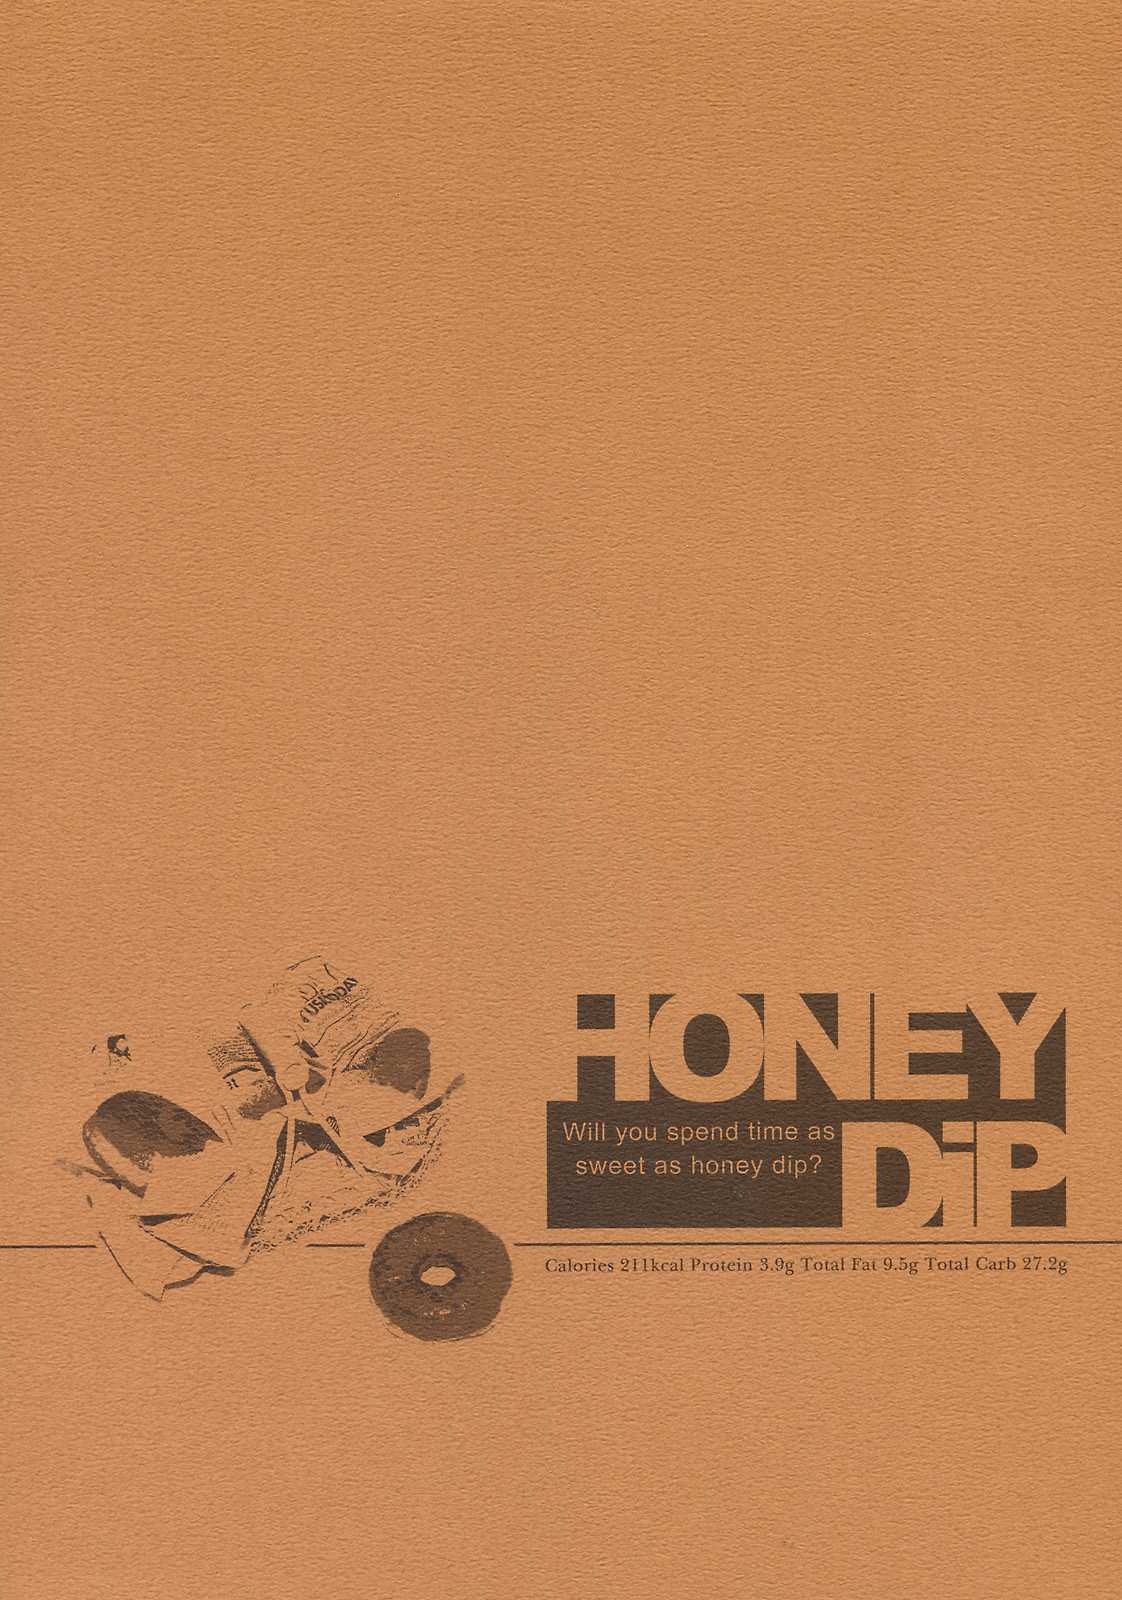 [Mix-ism] Honey Dip (To Heart 2) 